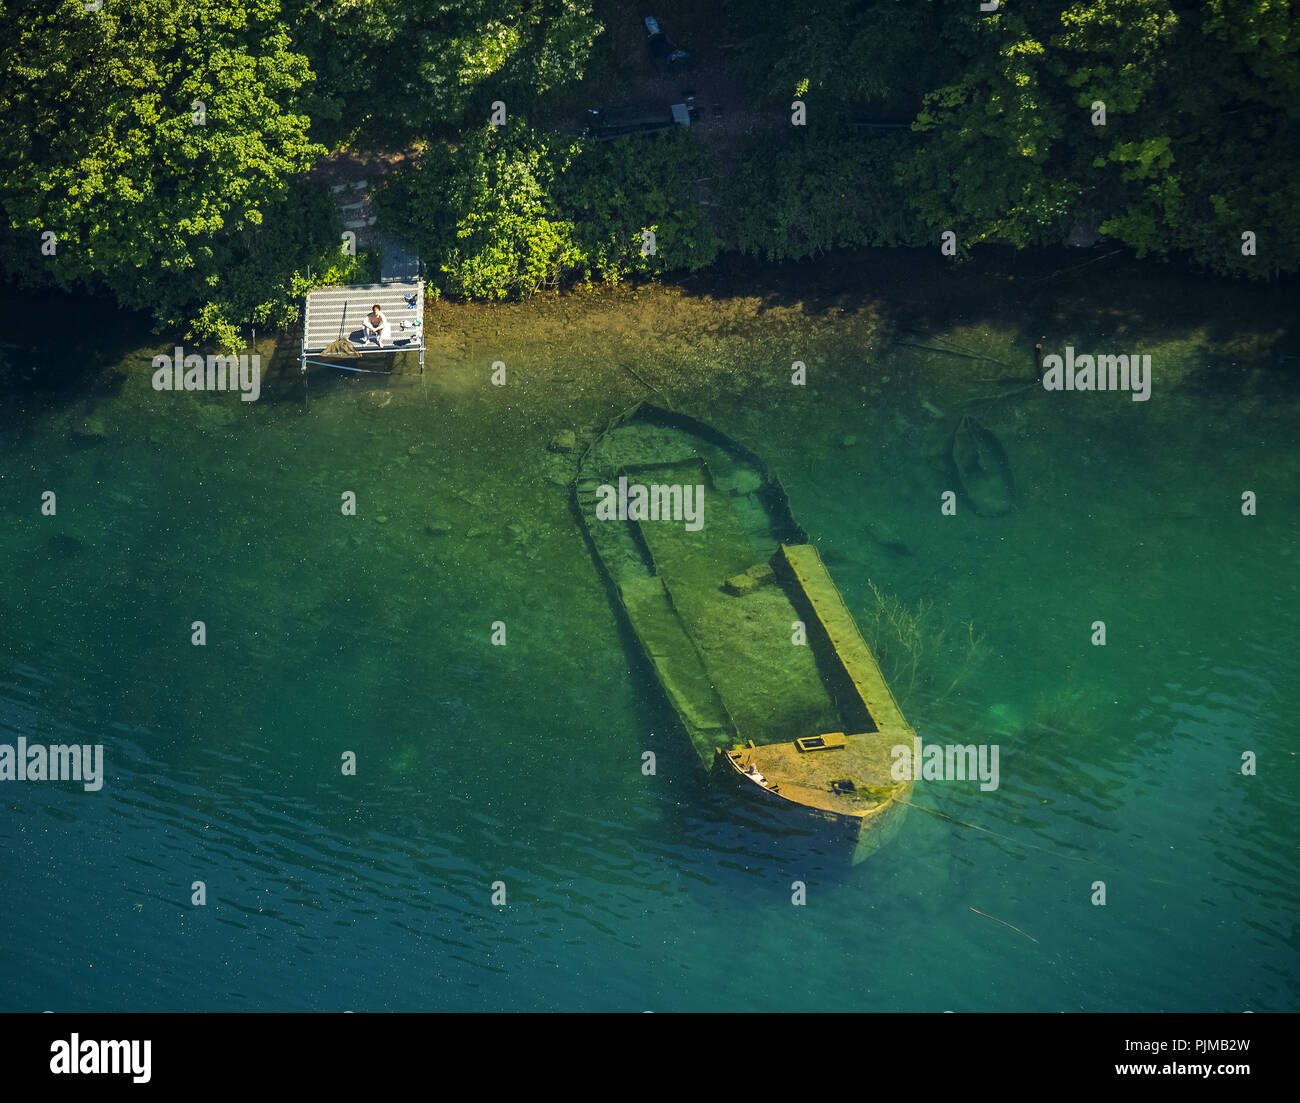 sunken boat with angler at the Escher lake in Cologne, green turquoise water, Cologne, Rhineland, North Rhine-Westphalia, Germany Stock Photo